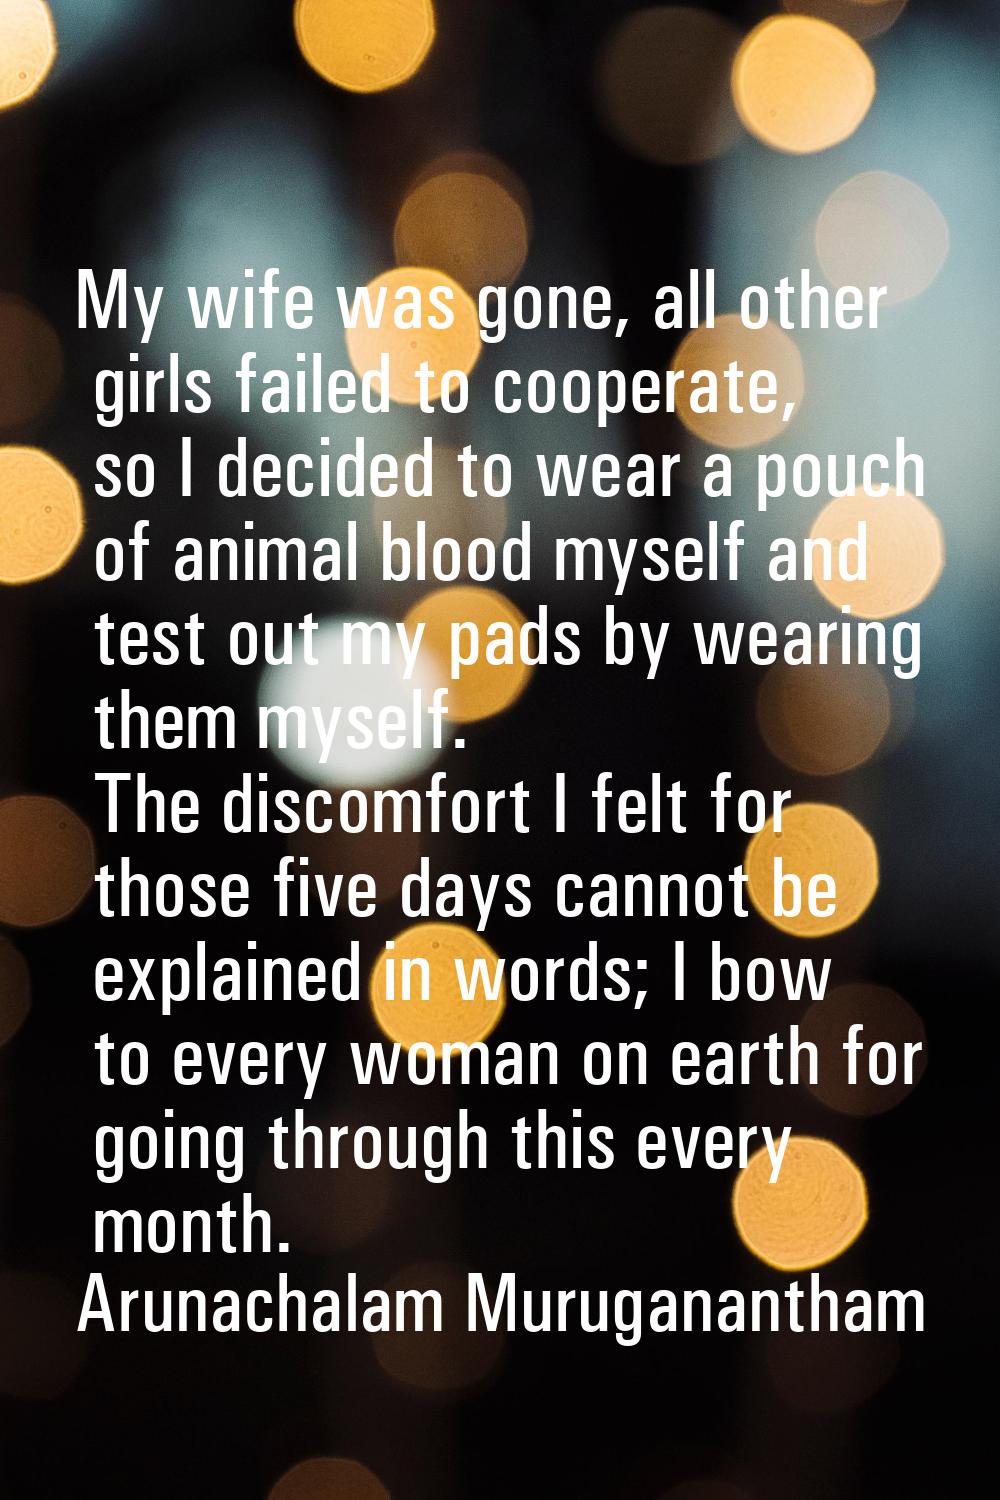 My wife was gone, all other girls failed to cooperate, so I decided to wear a pouch of animal blood